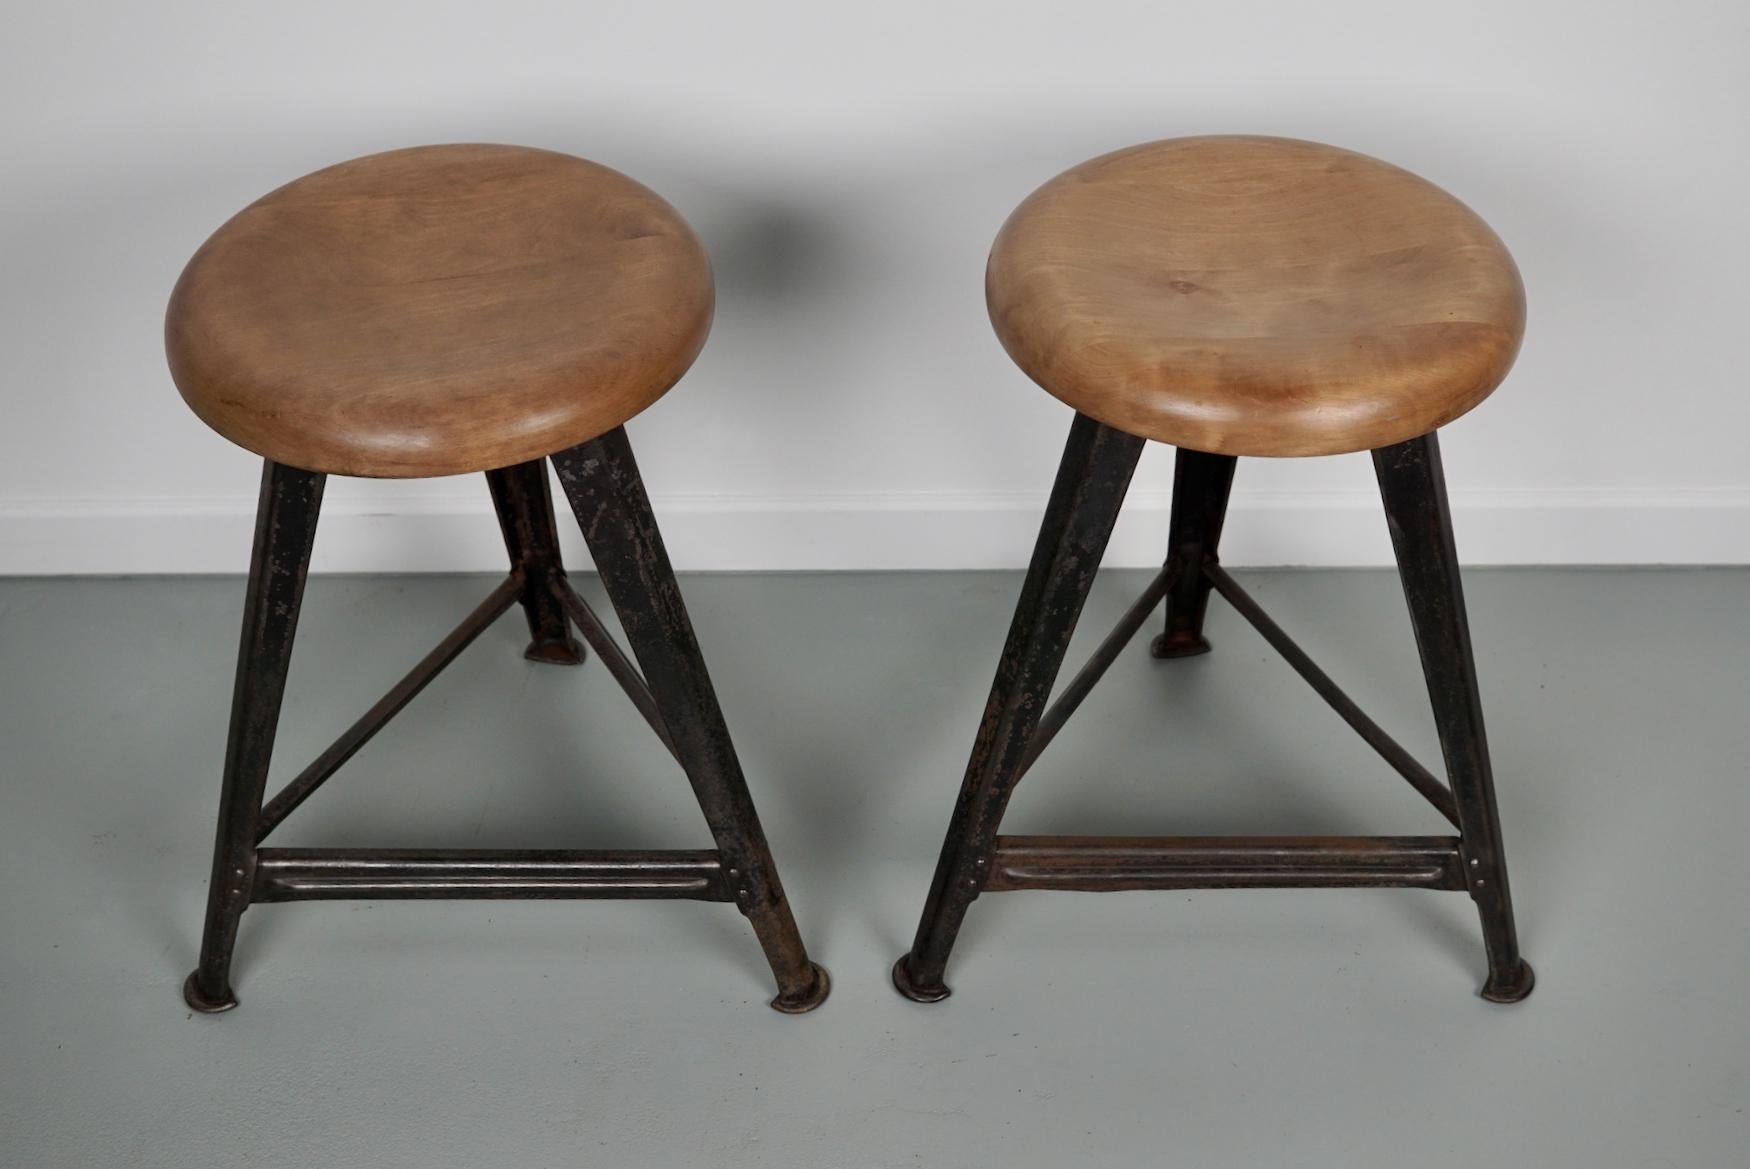 Pair of Industrial Steel Factory Stools by Rowac Robert Wagner Chemnitz, 1930s For Sale 5